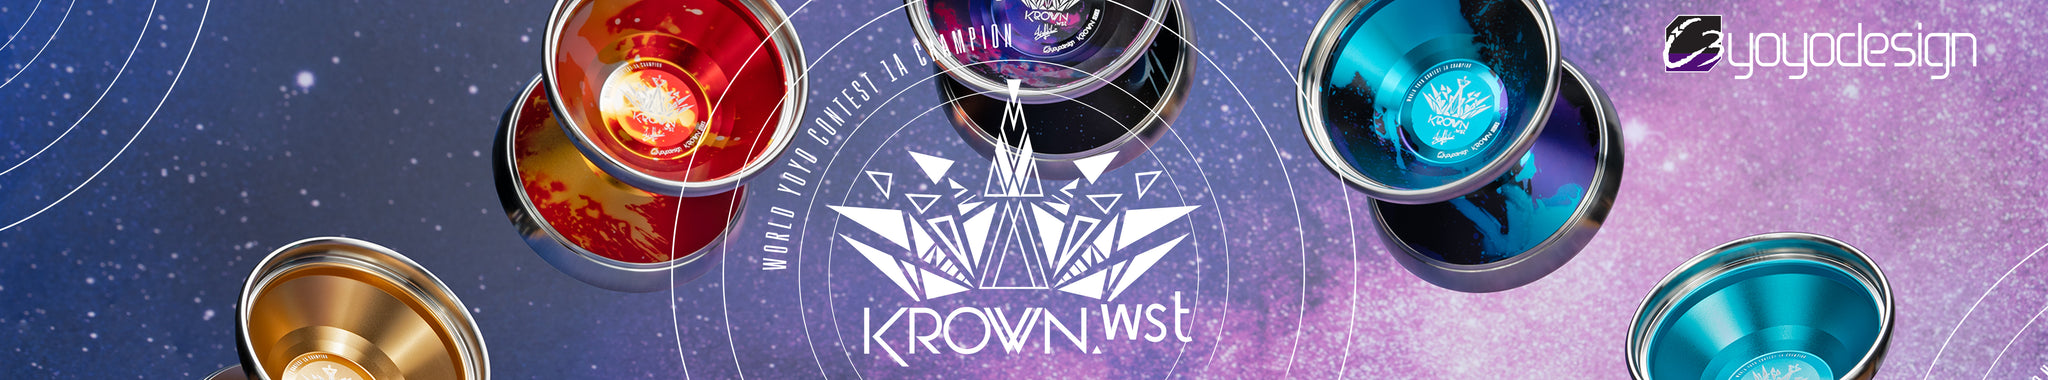 Krown .wst by C3yoyodesign